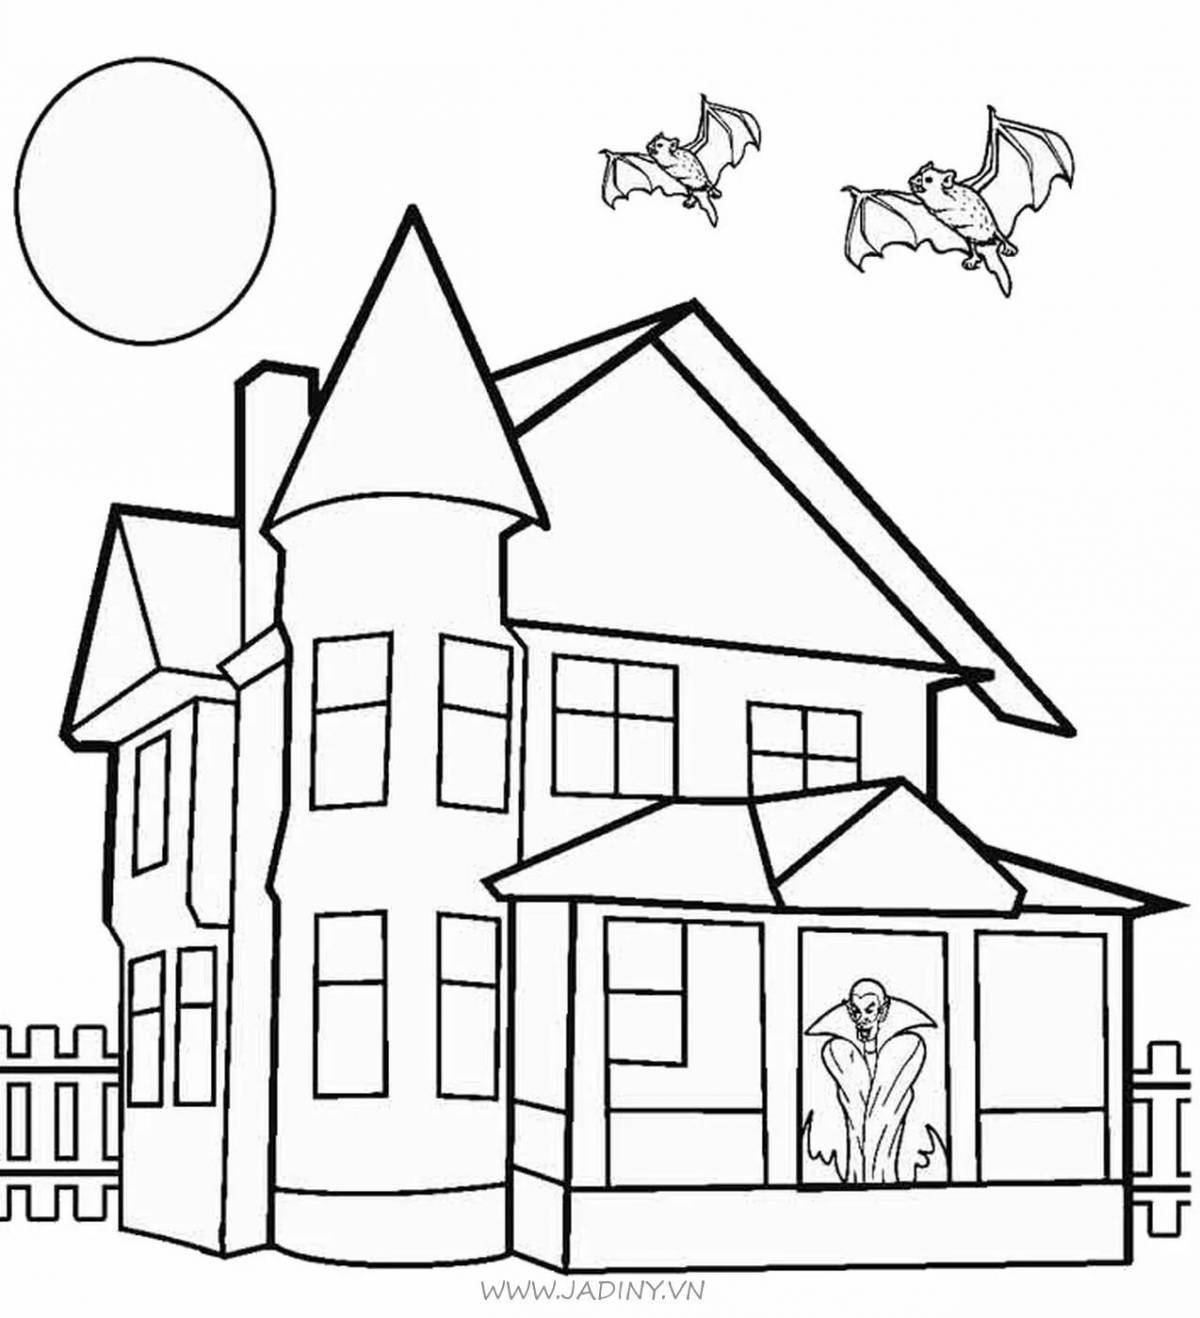 Sunny cottage coloring page